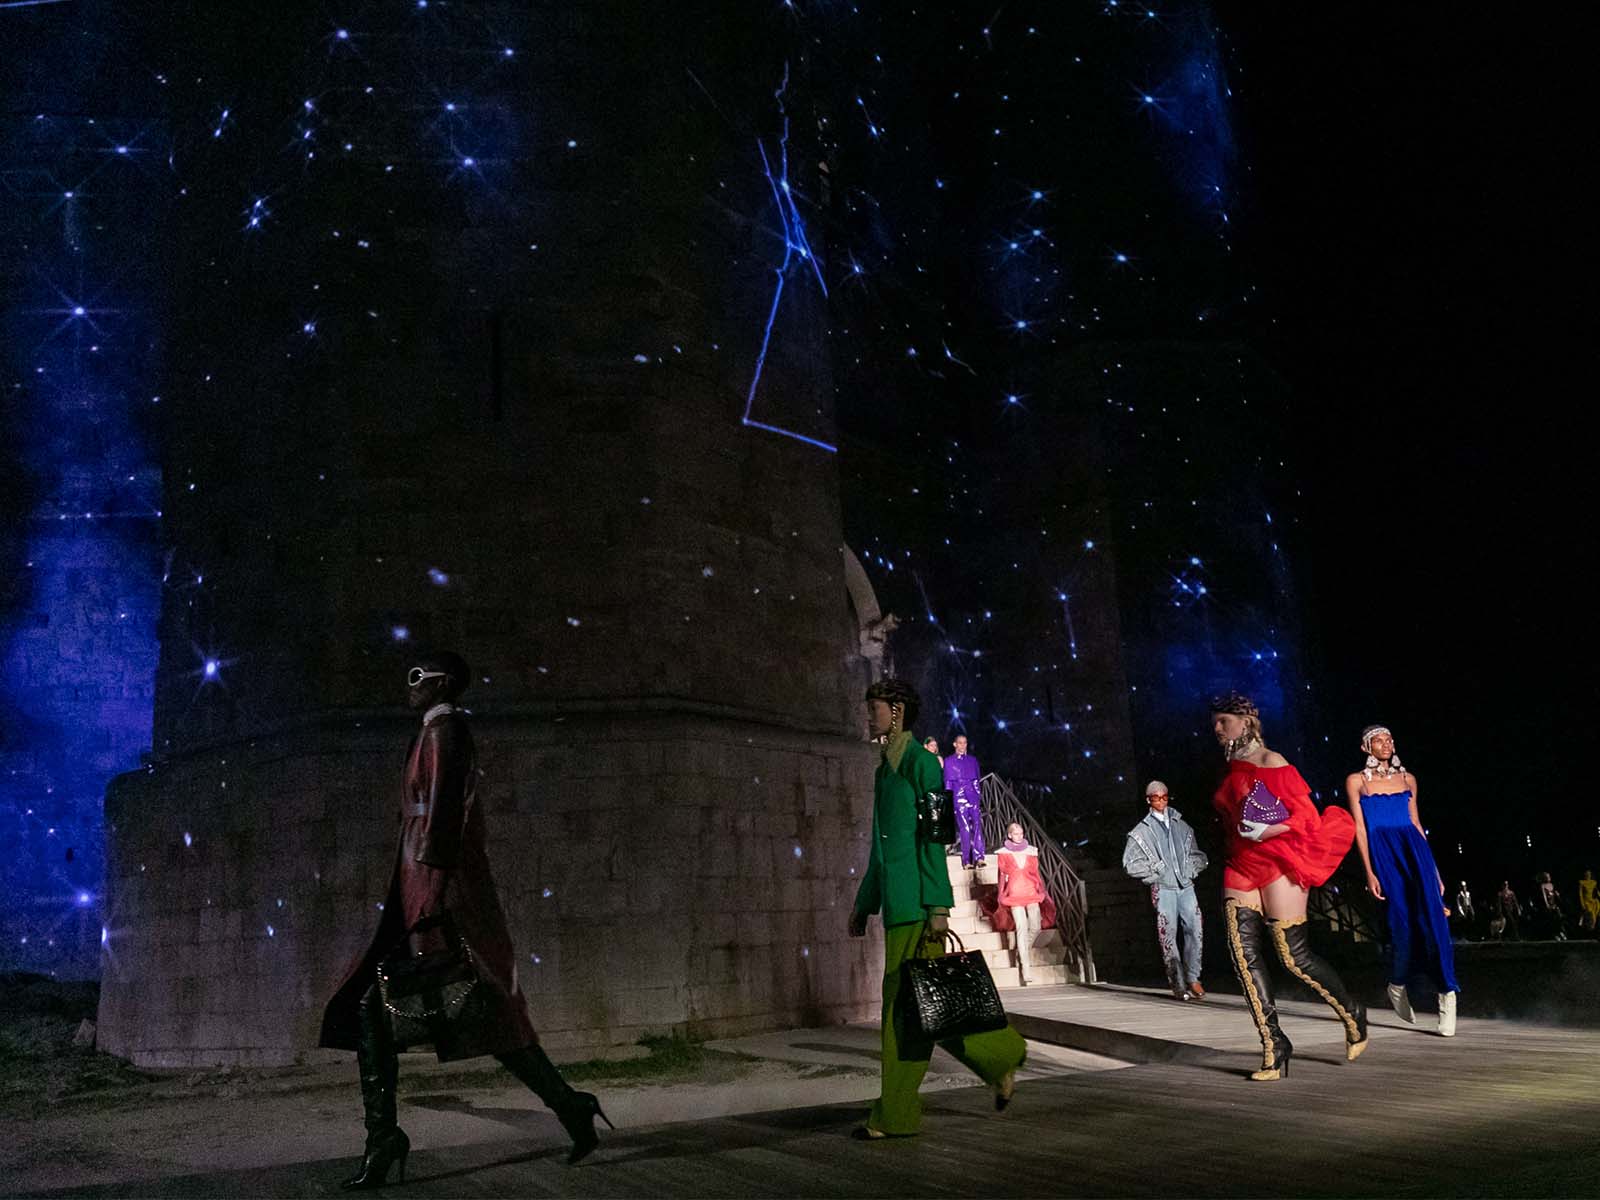 “Gucci Cosmogonie” goes far beyond the world of constellations